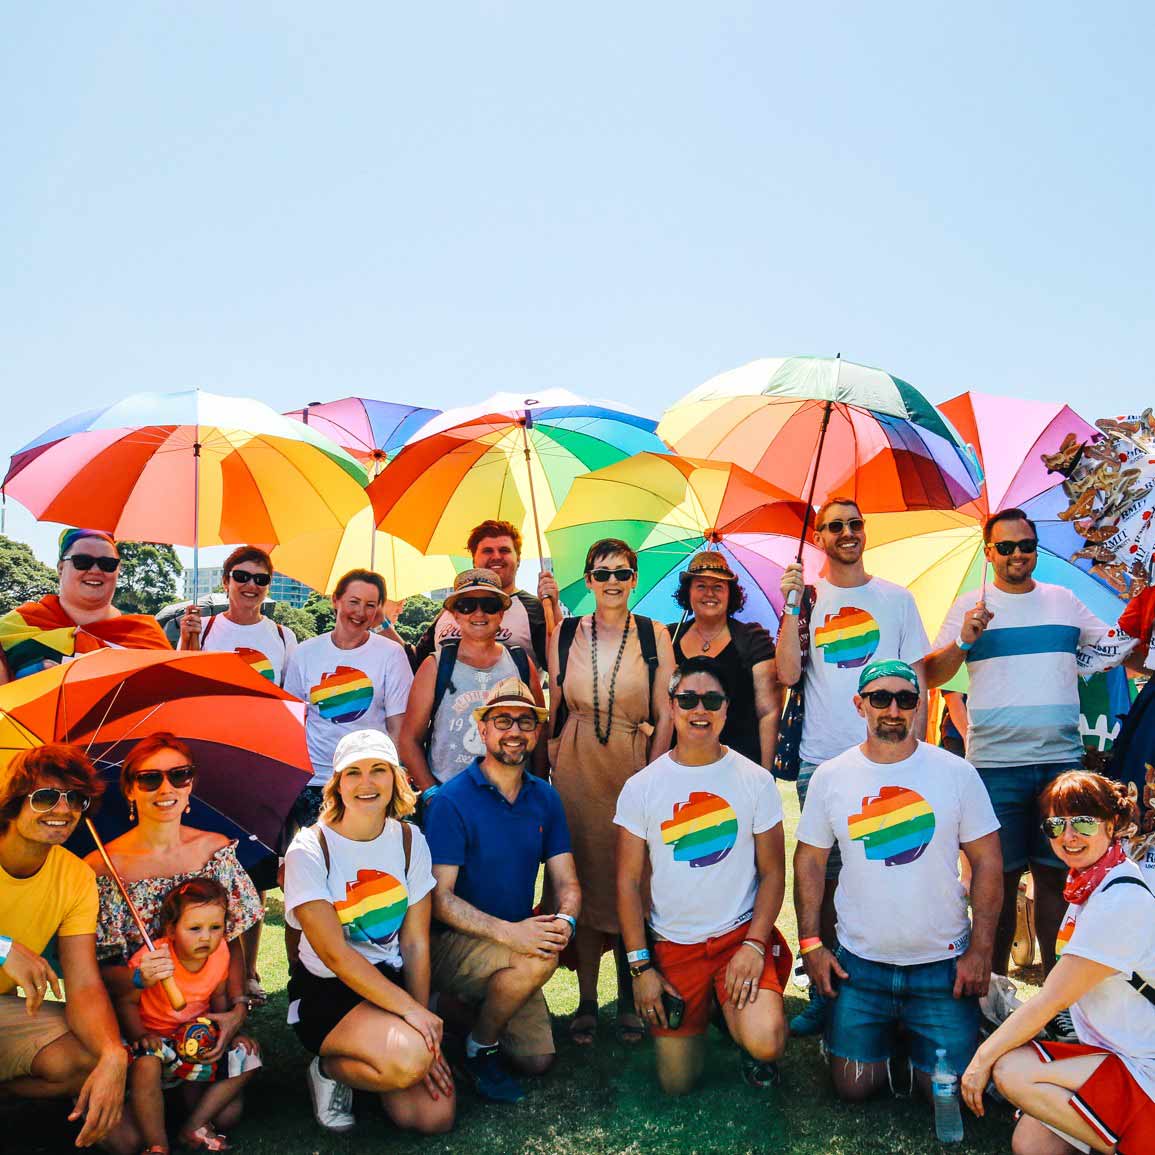 Group of people with rainbow umbrellas